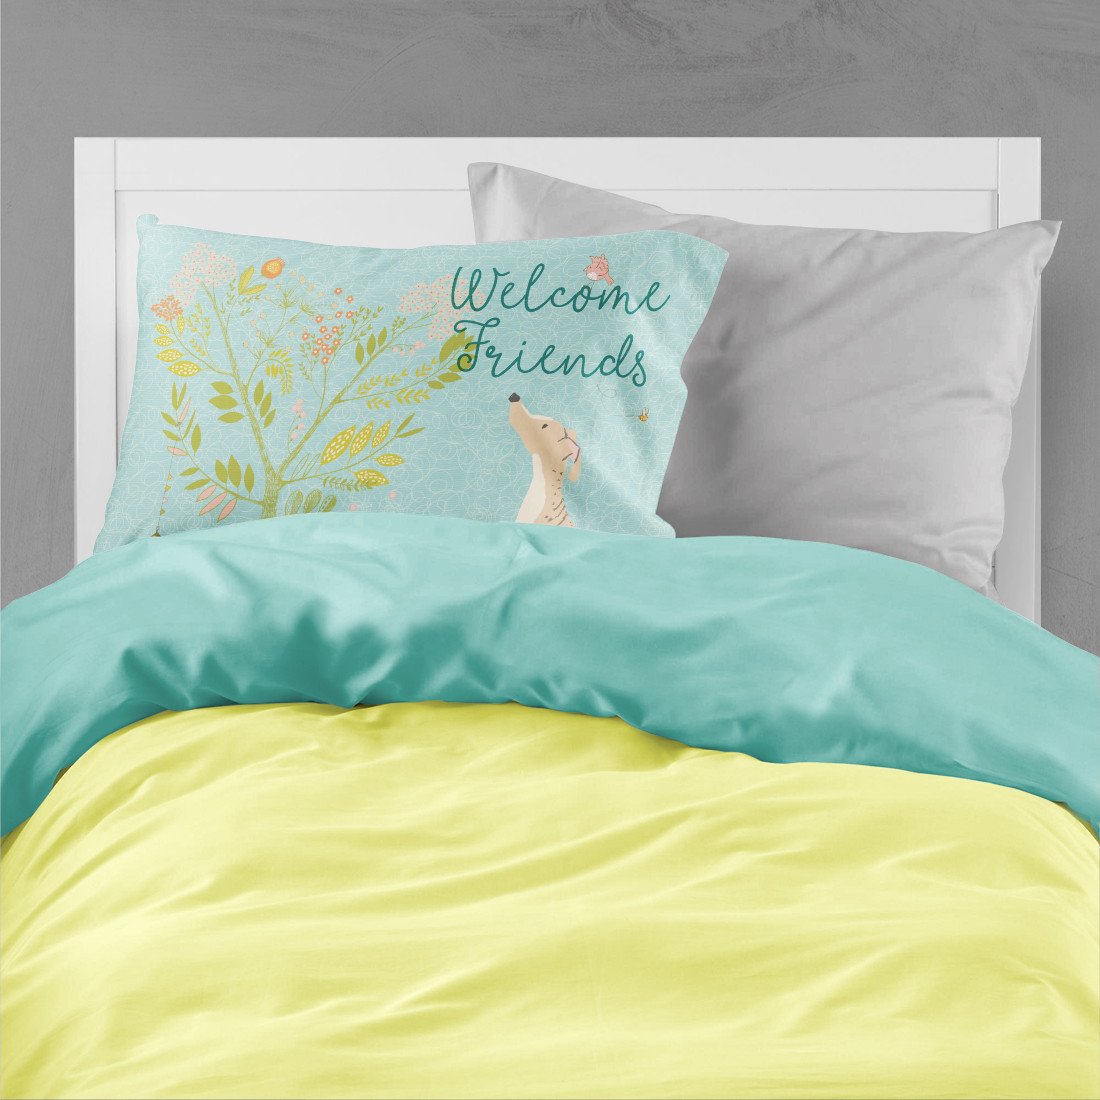 Welcome Friends Brindle Greyhound Fabric Standard Pillowcase BB7591PILLOWCASE by Caroline's Treasures